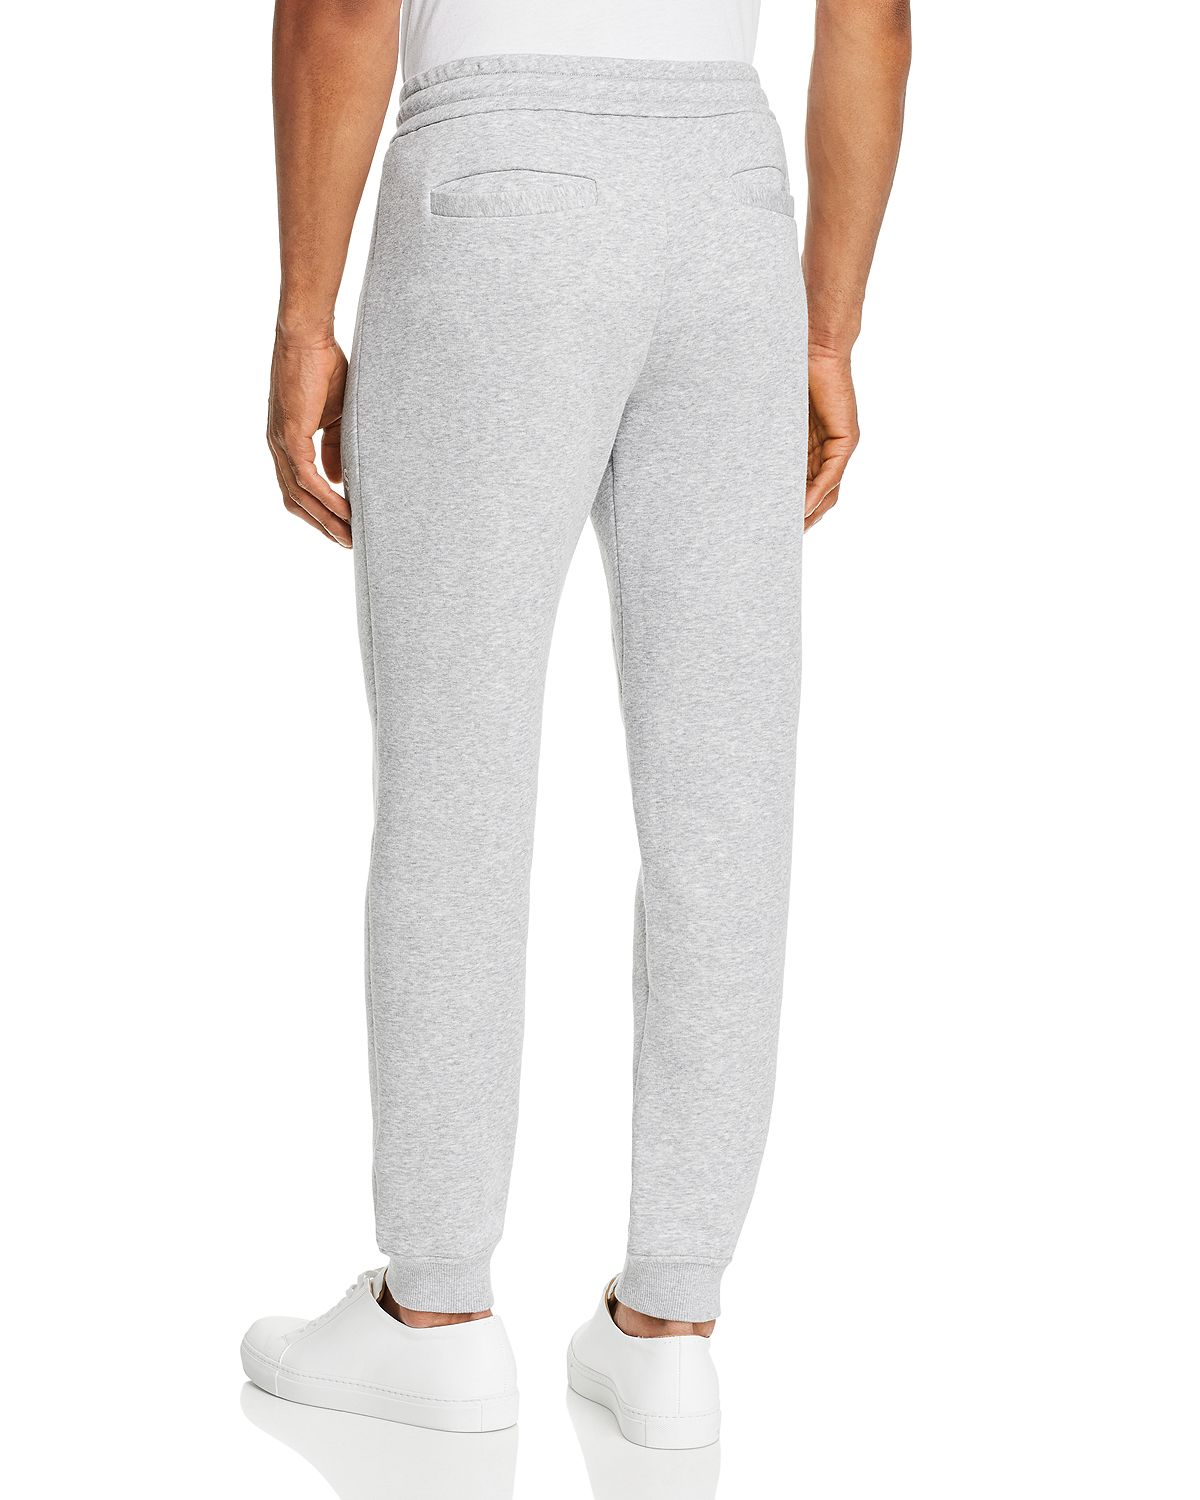 Michael Kors French Terry Jogger Pants Heather Gray